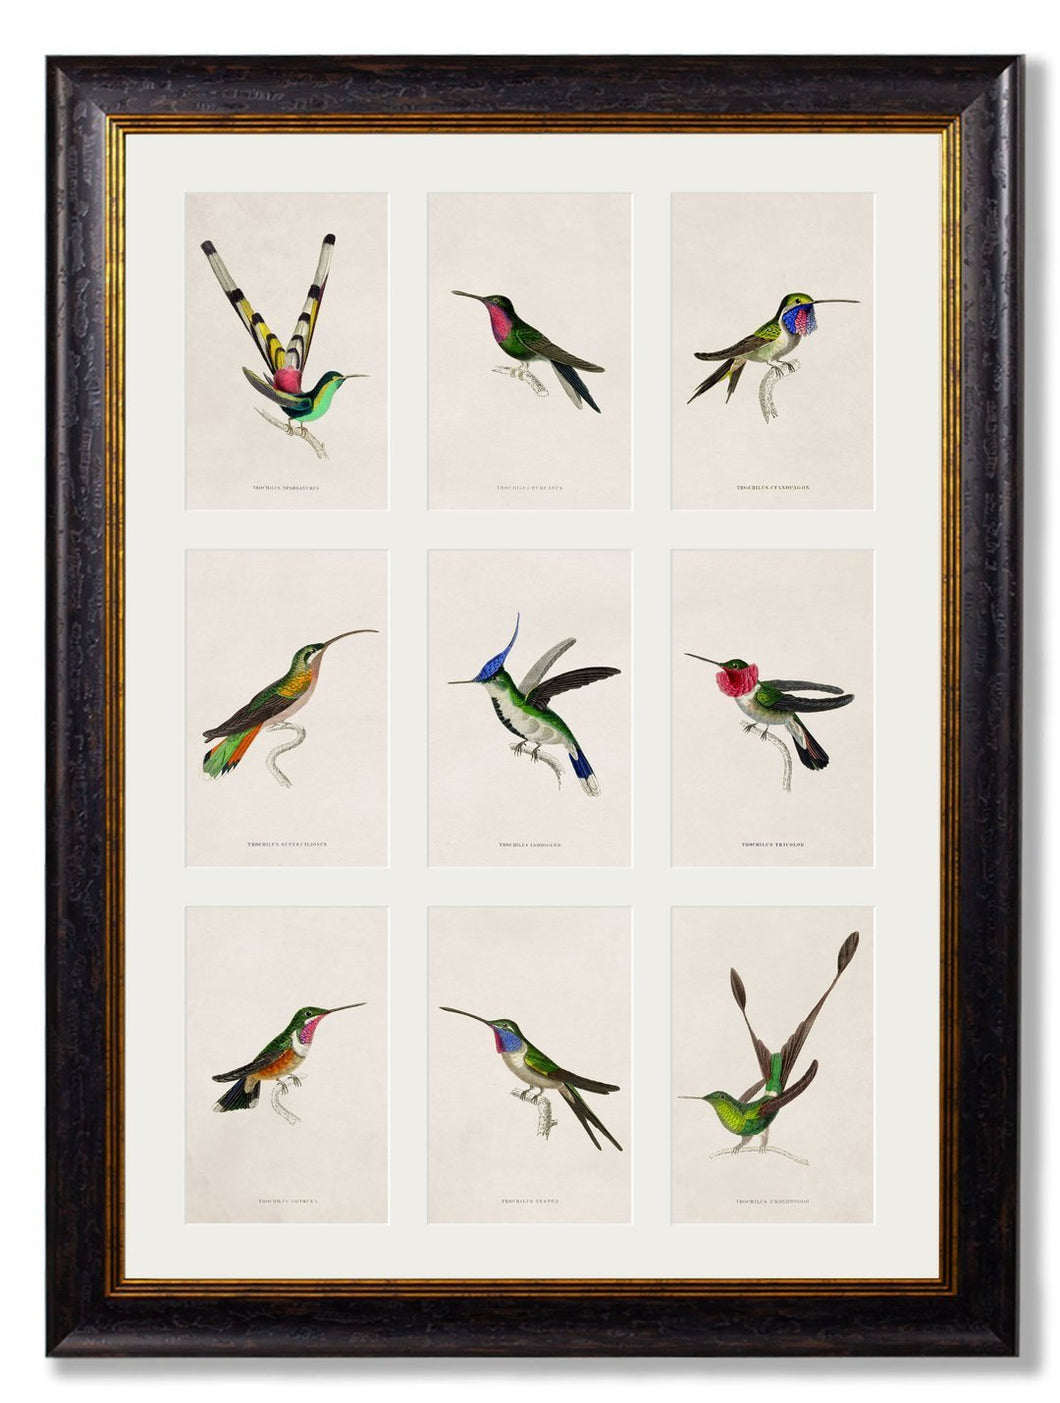 Multi Image of Hummingbird Prints - Referenced From 1800's IllustrationsVintage Frog T/APictures & Prints